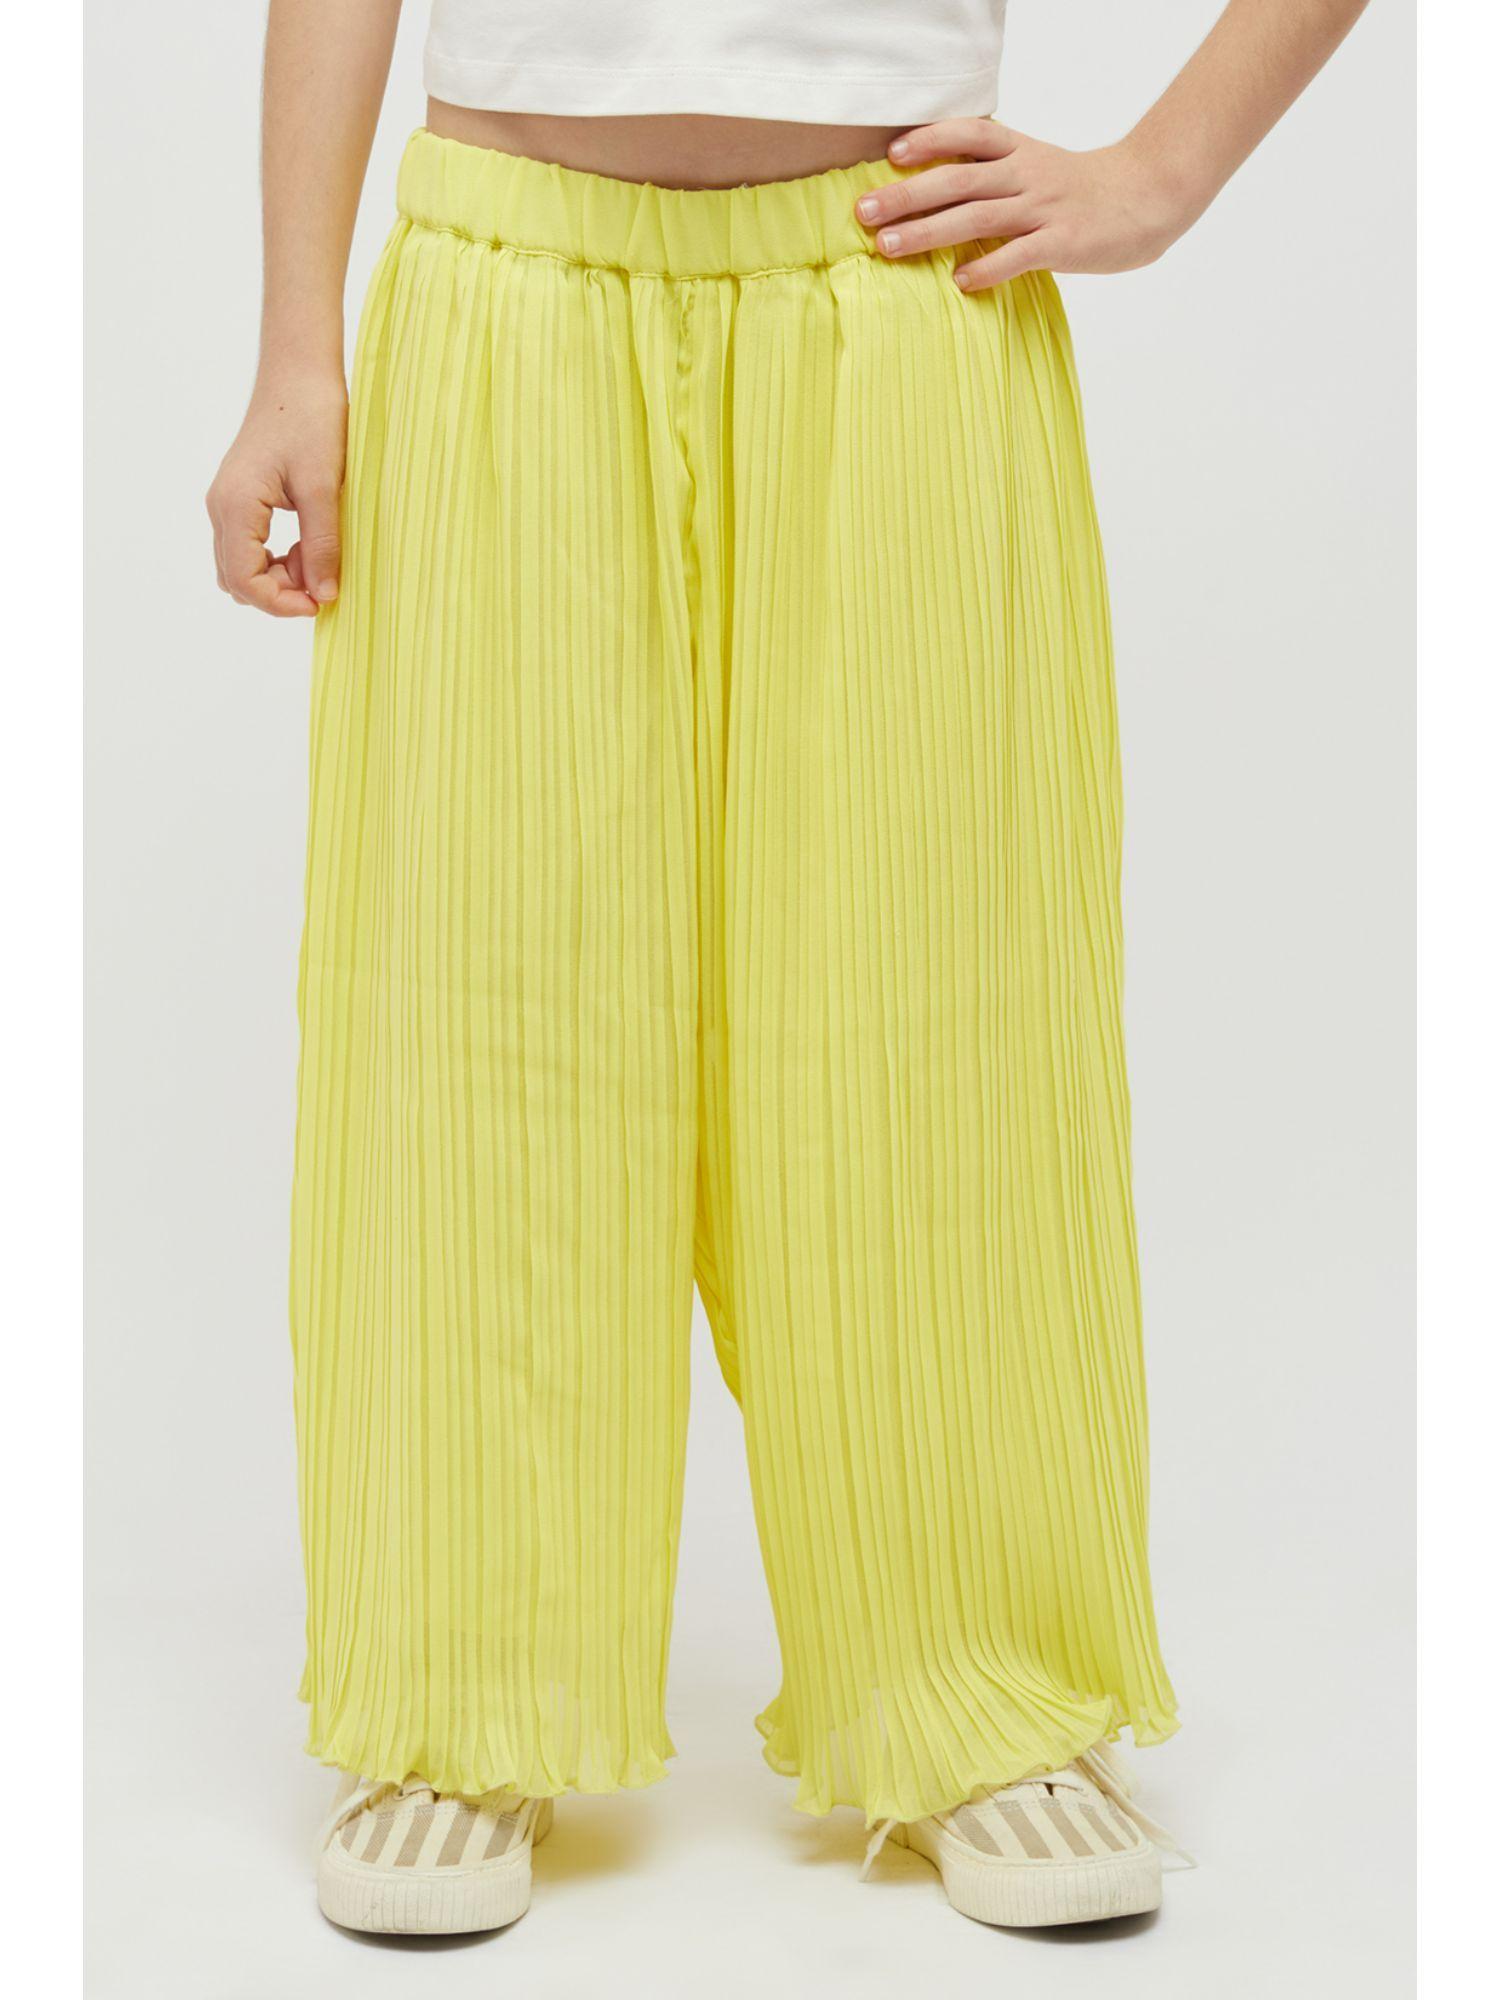 crushed yellow culottes